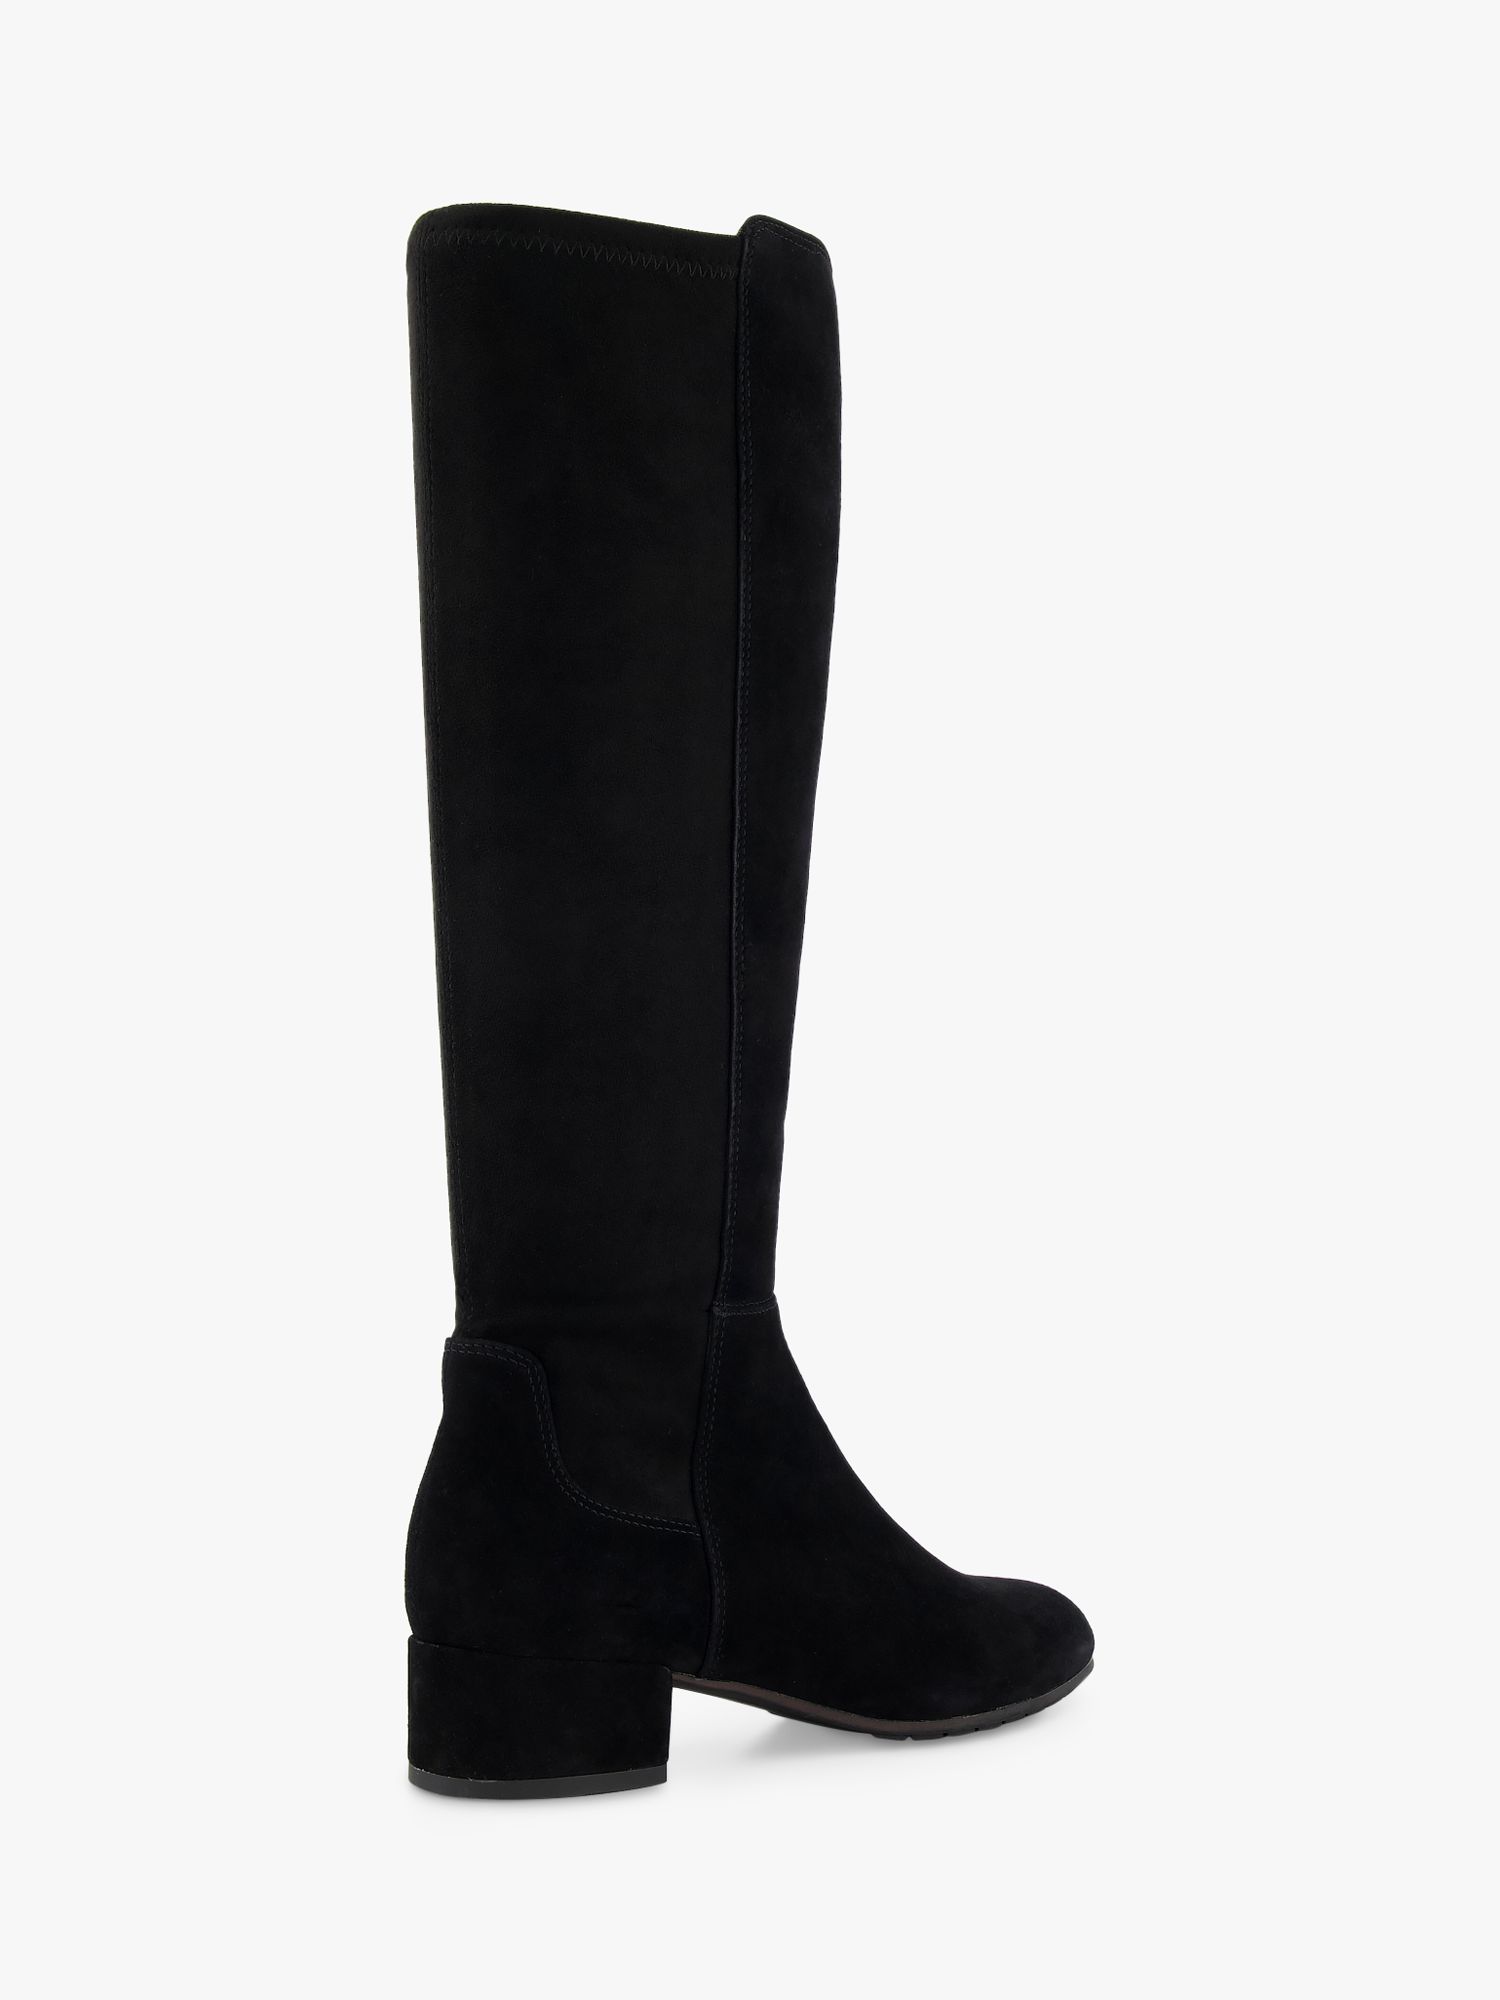 Dune Wide Fit Tayla Suede Knee Length Boot, Black at John Lewis & Partners